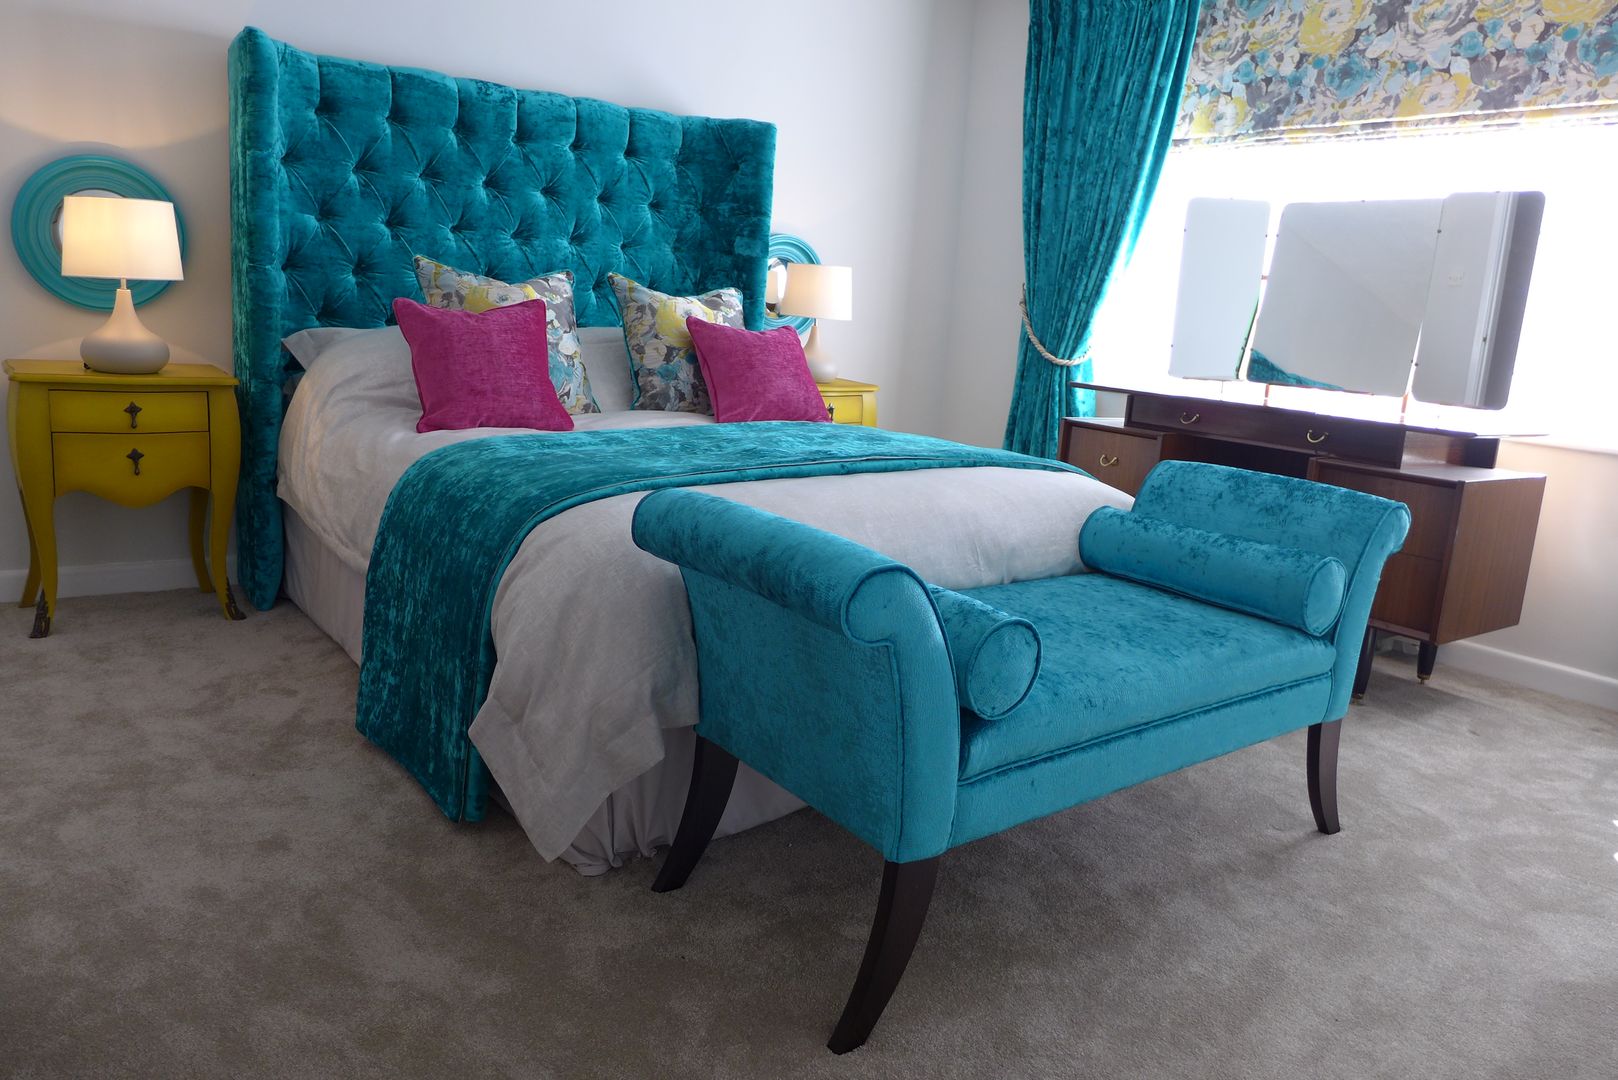 hotel style bedroom Style Within Phòng ngủ phong cách kinh điển bed end chaise,blue velvet,dress curtains,roman blind,pink accents,velvet headboard,fabric headboard,boutique bedroom,hotel style bedroom